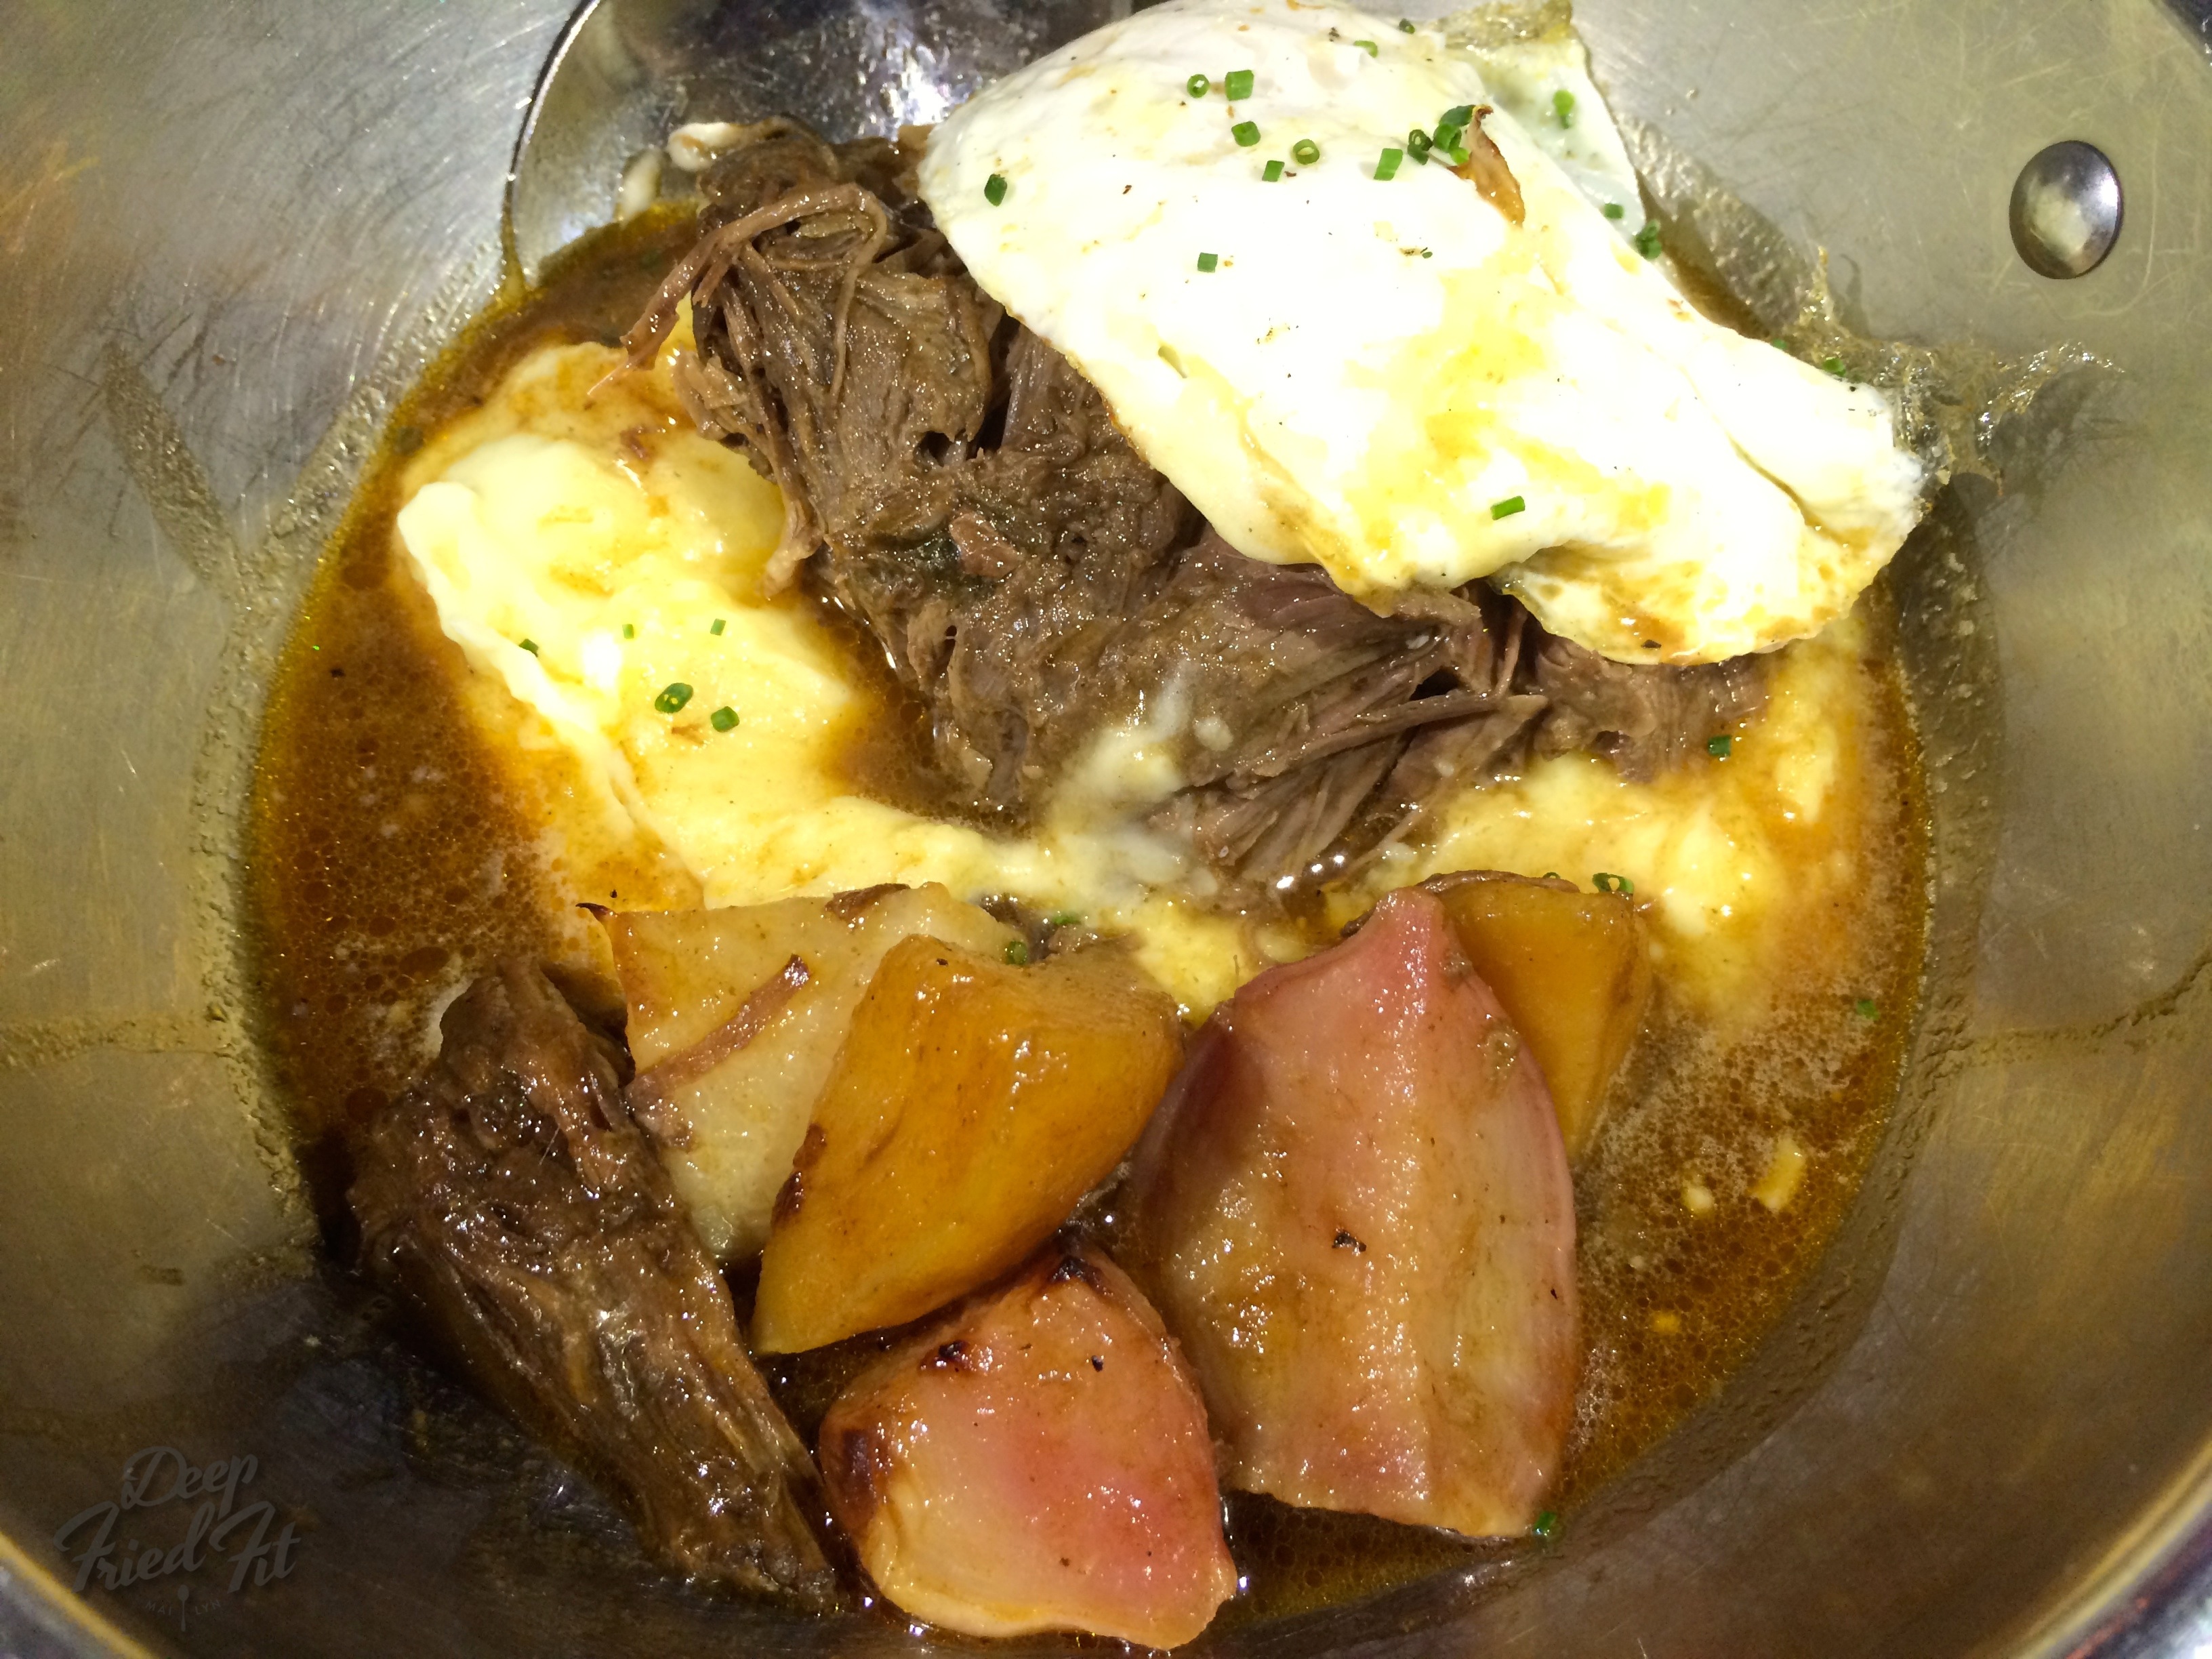 Slow Cooked Beef Shoulder over Yukon potatoes and root veggies.